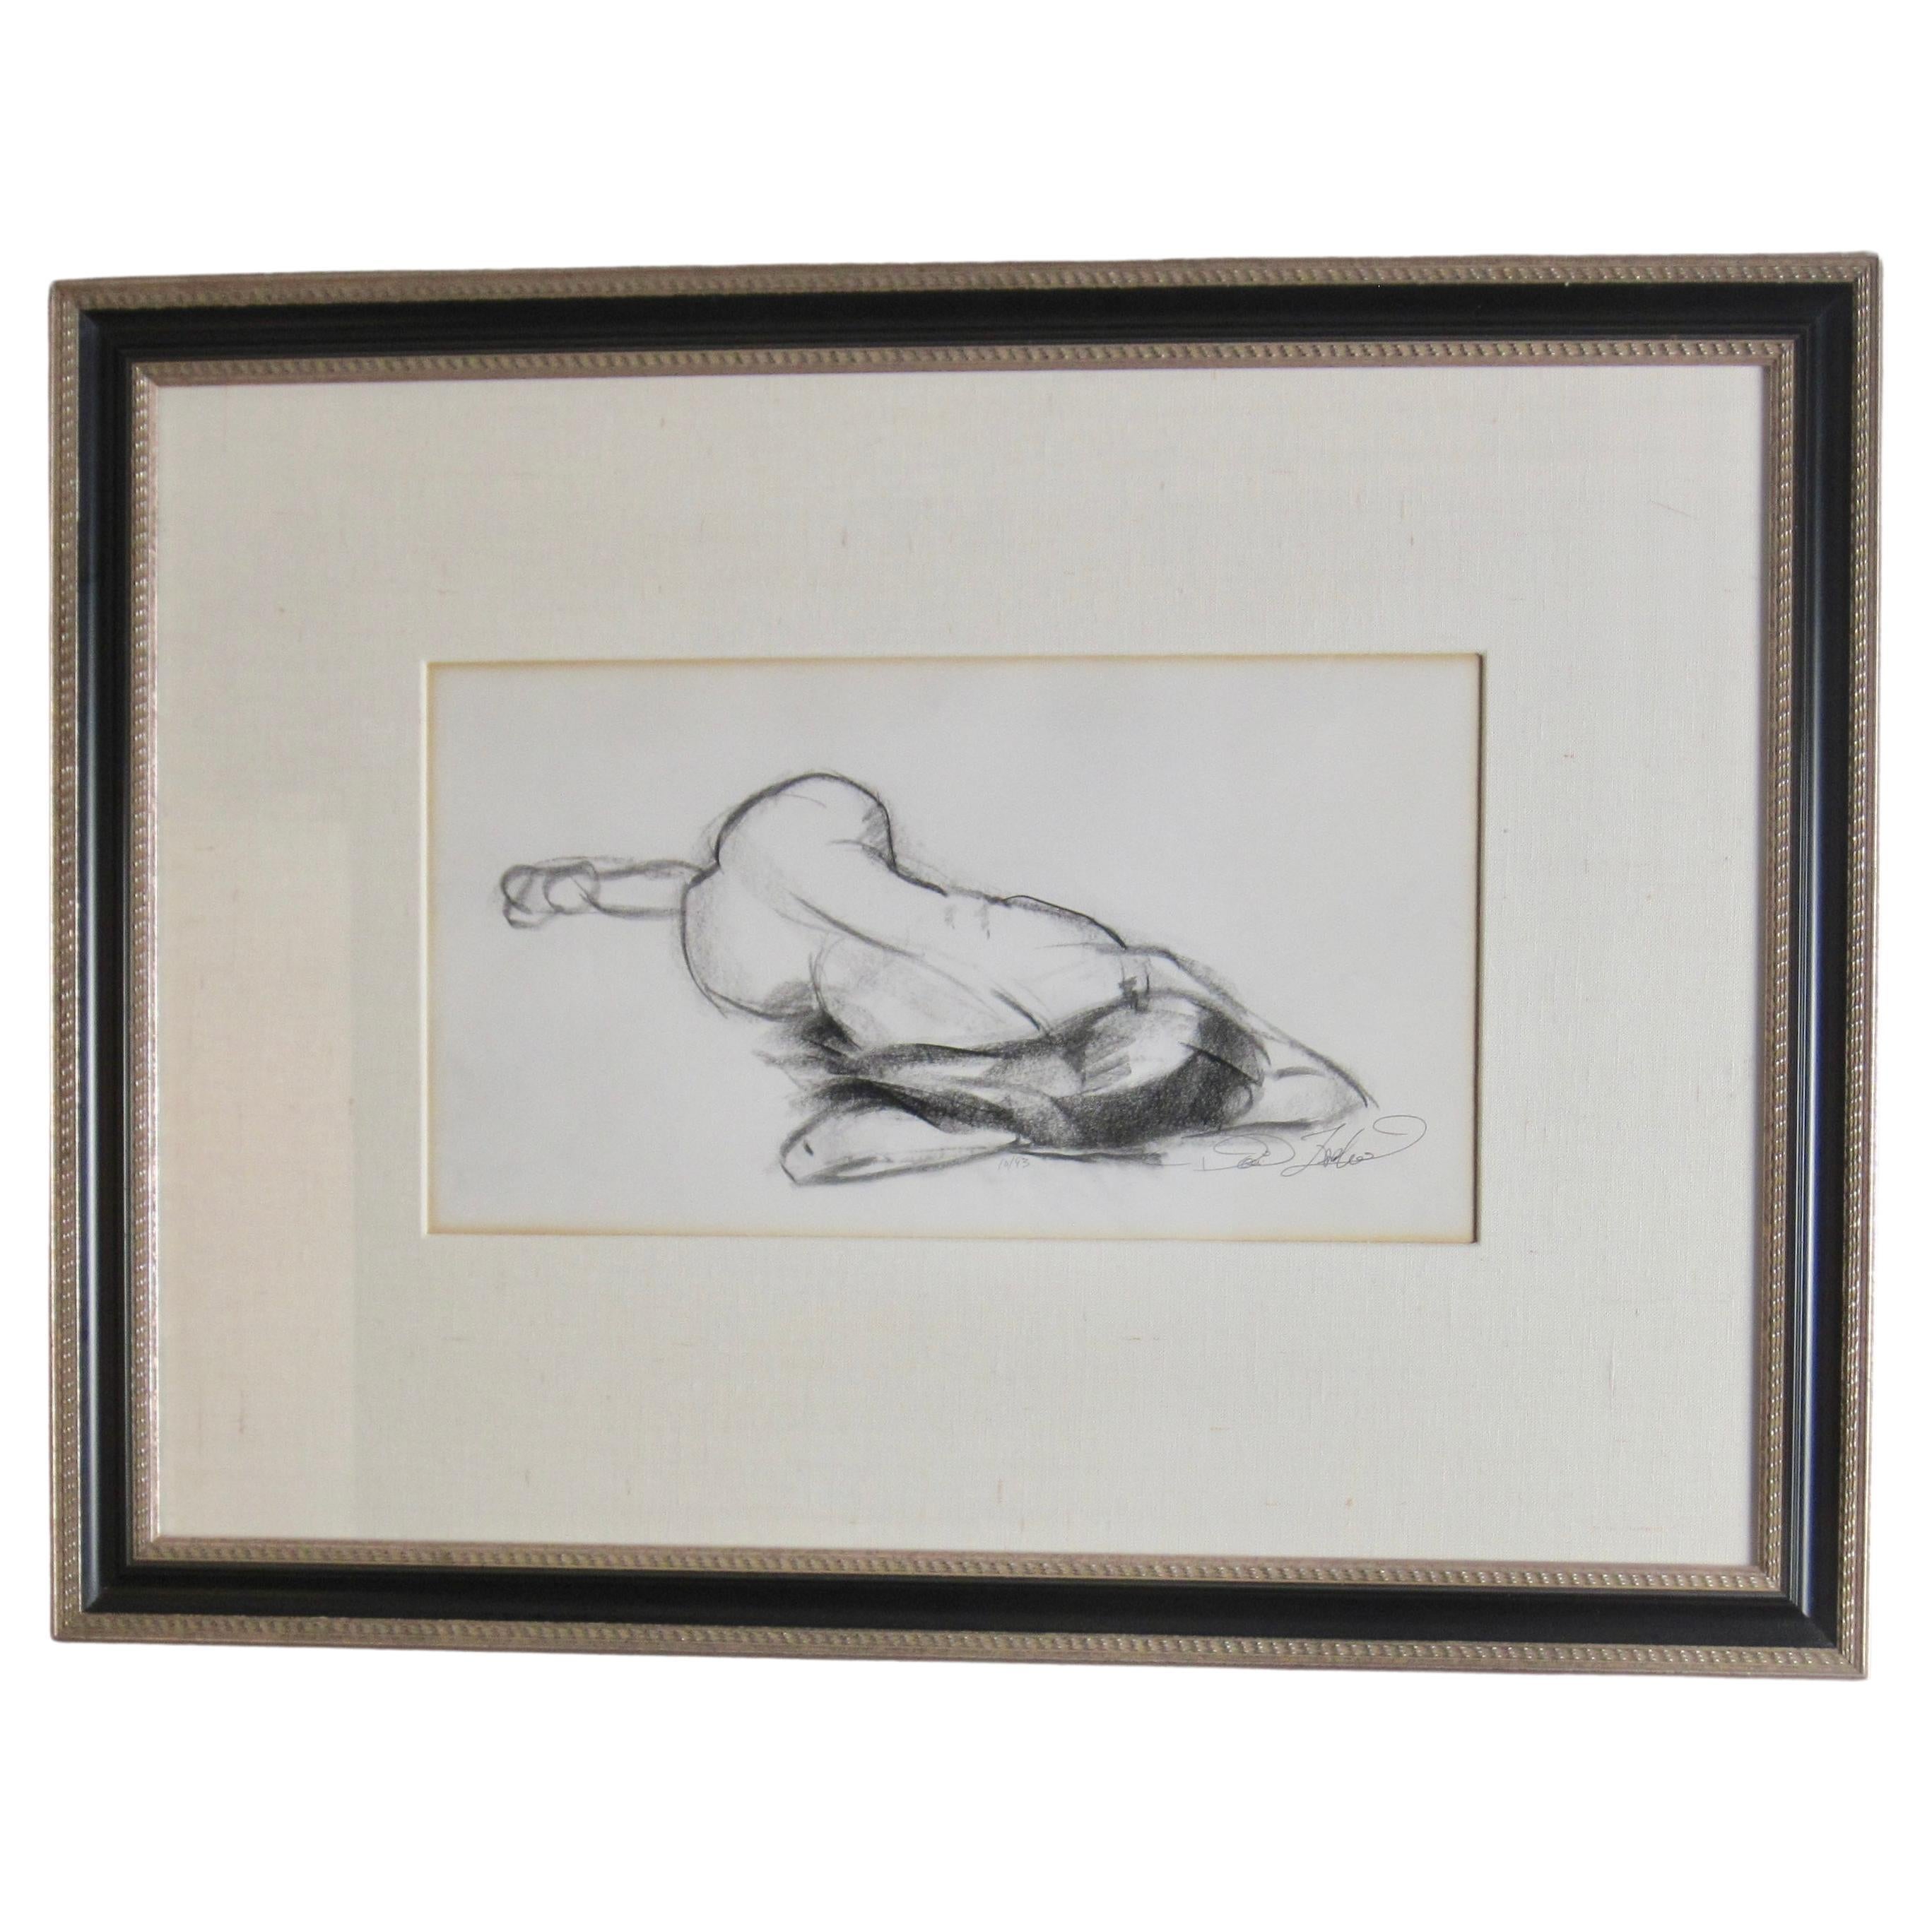 Reclining Nude Charcoal Drawing, Framed